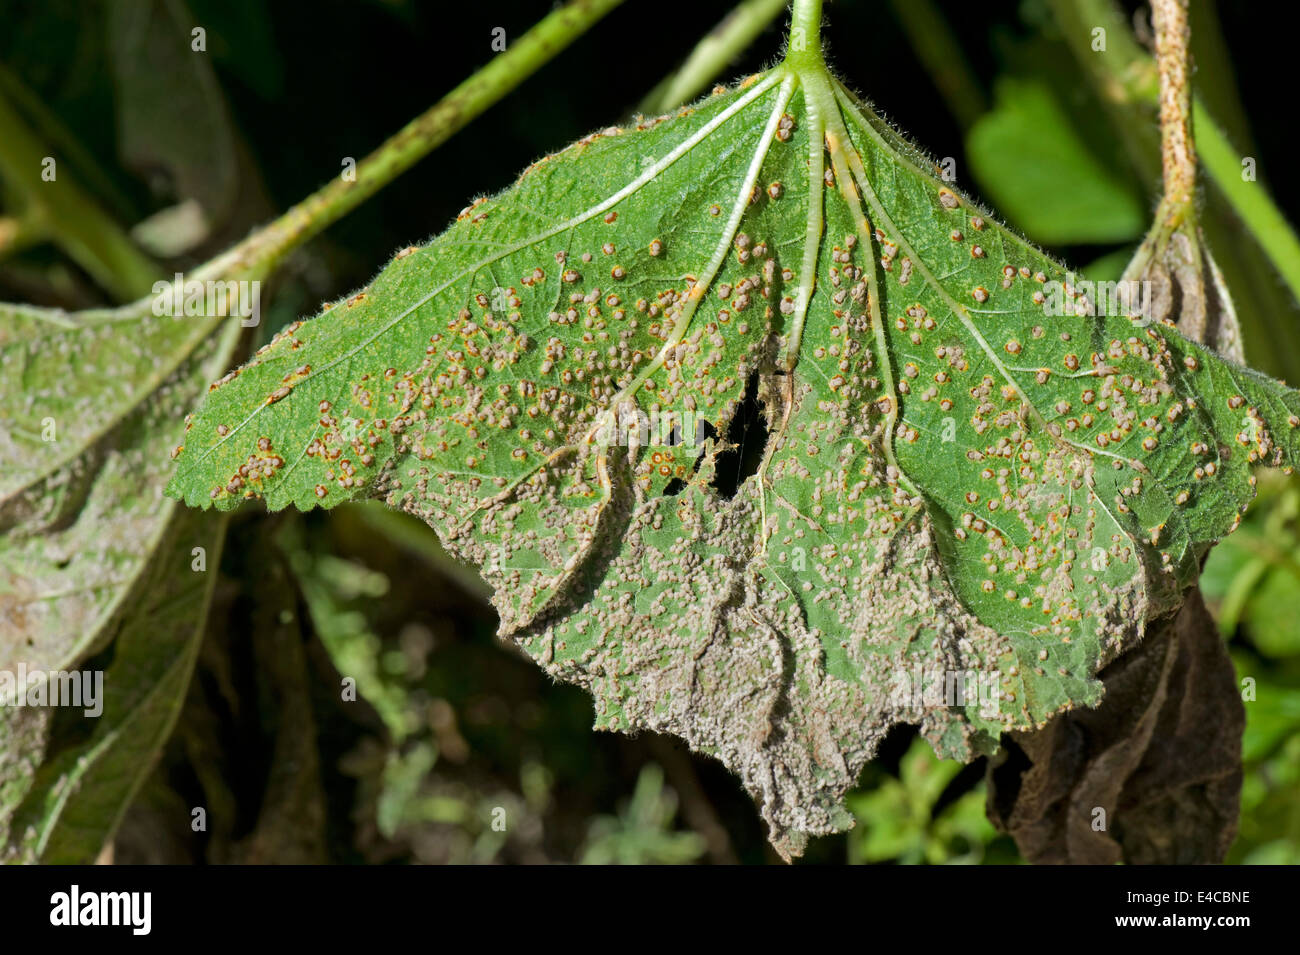 Hollyhock rust, Puccinia malvacearum, severe damage and spotting on the lower surface of a hollyhock leaf Stock Photo